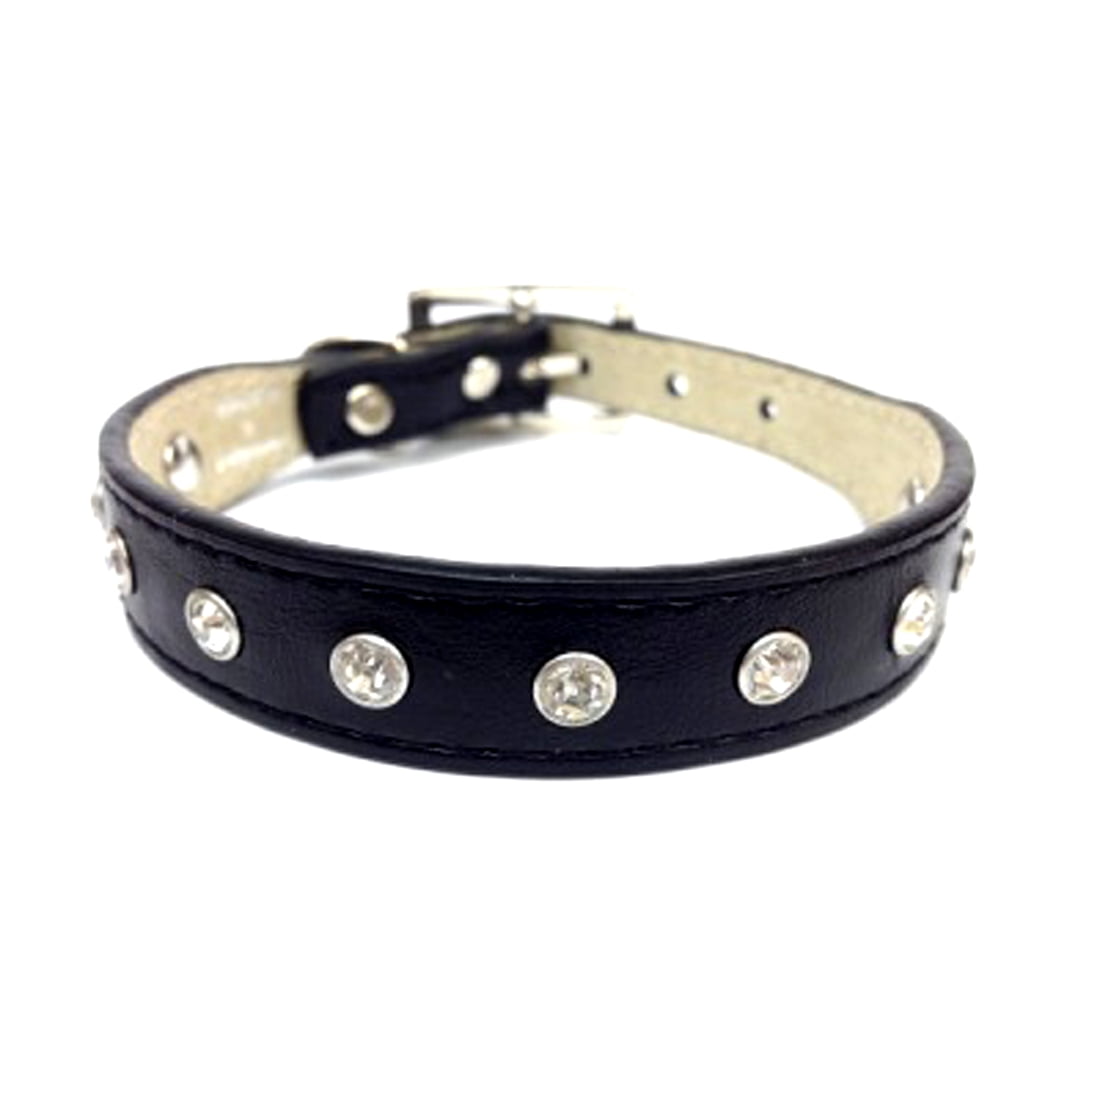 Narrow Black Leather Dog Collar with a Row of High Quality Clear ...